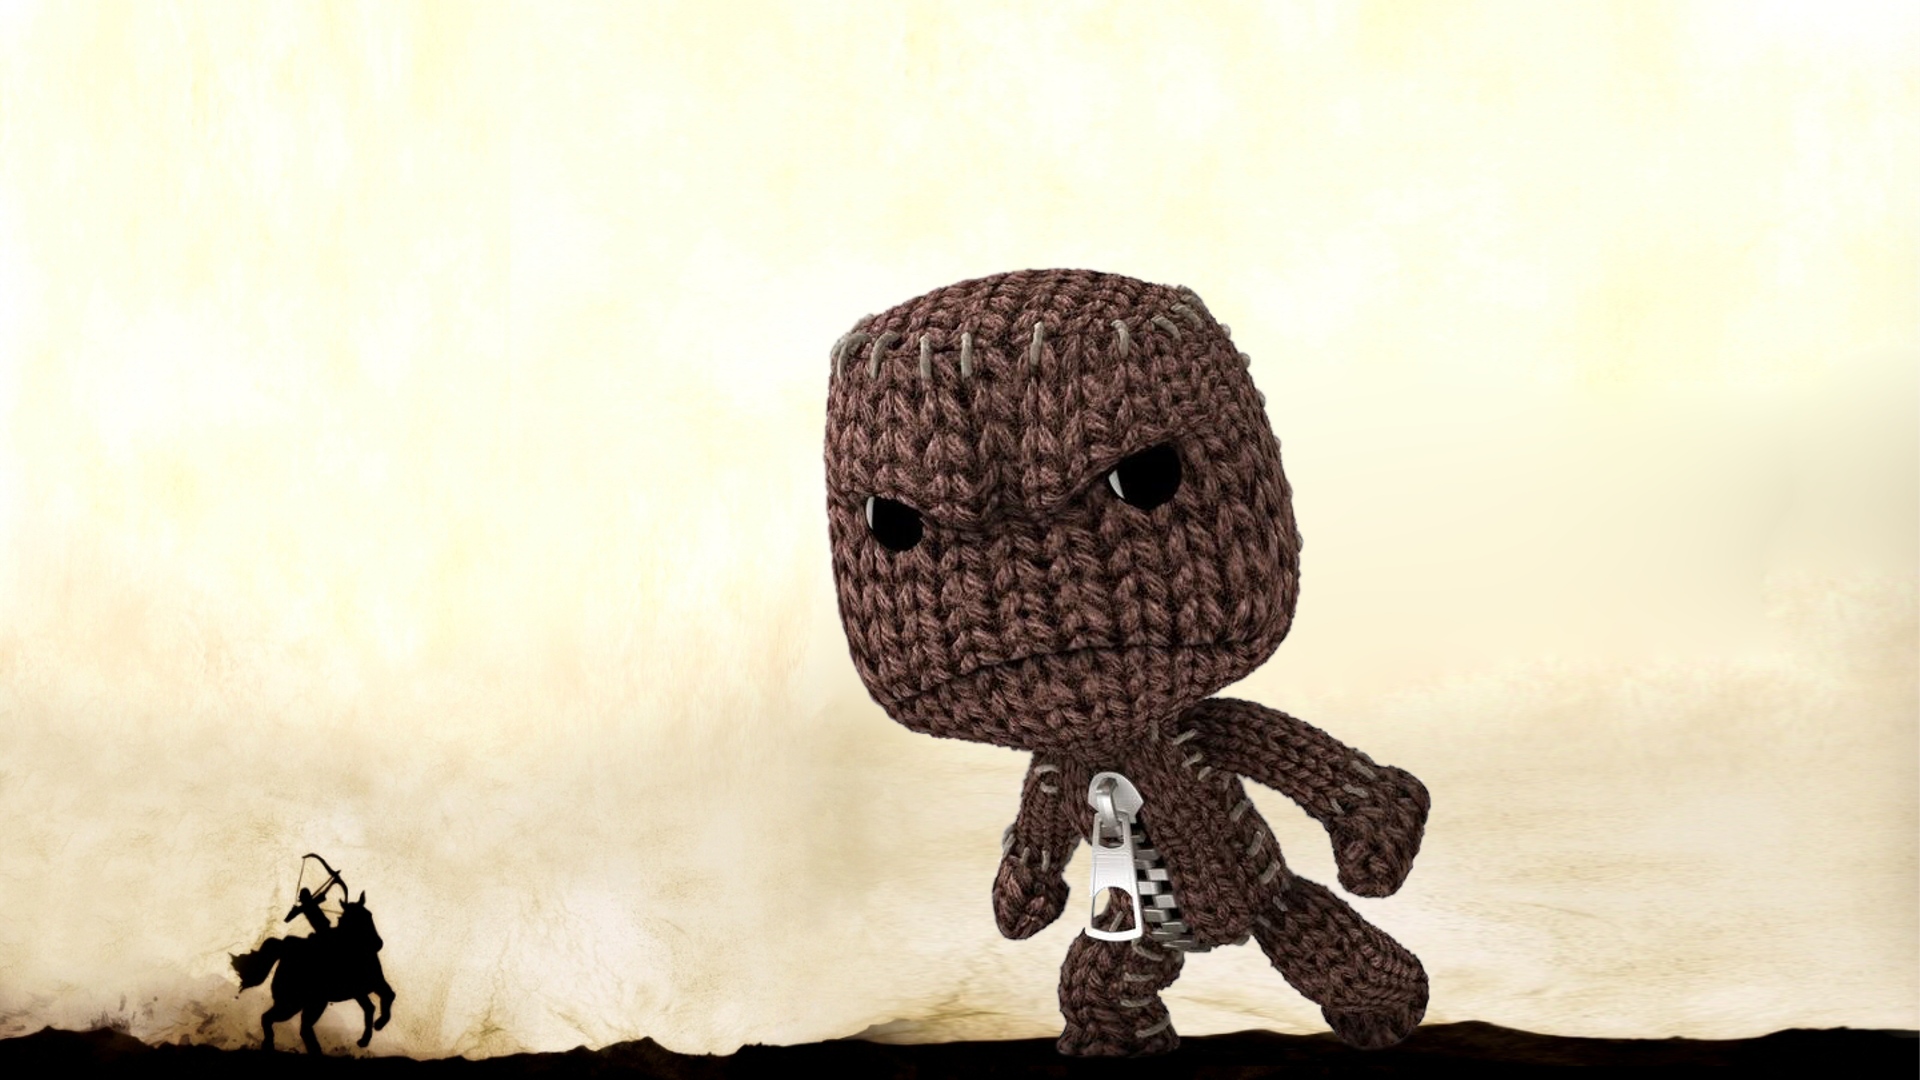 Little Big Pla Sackboy Shadow Of The Colossus HD Wallpaper Space